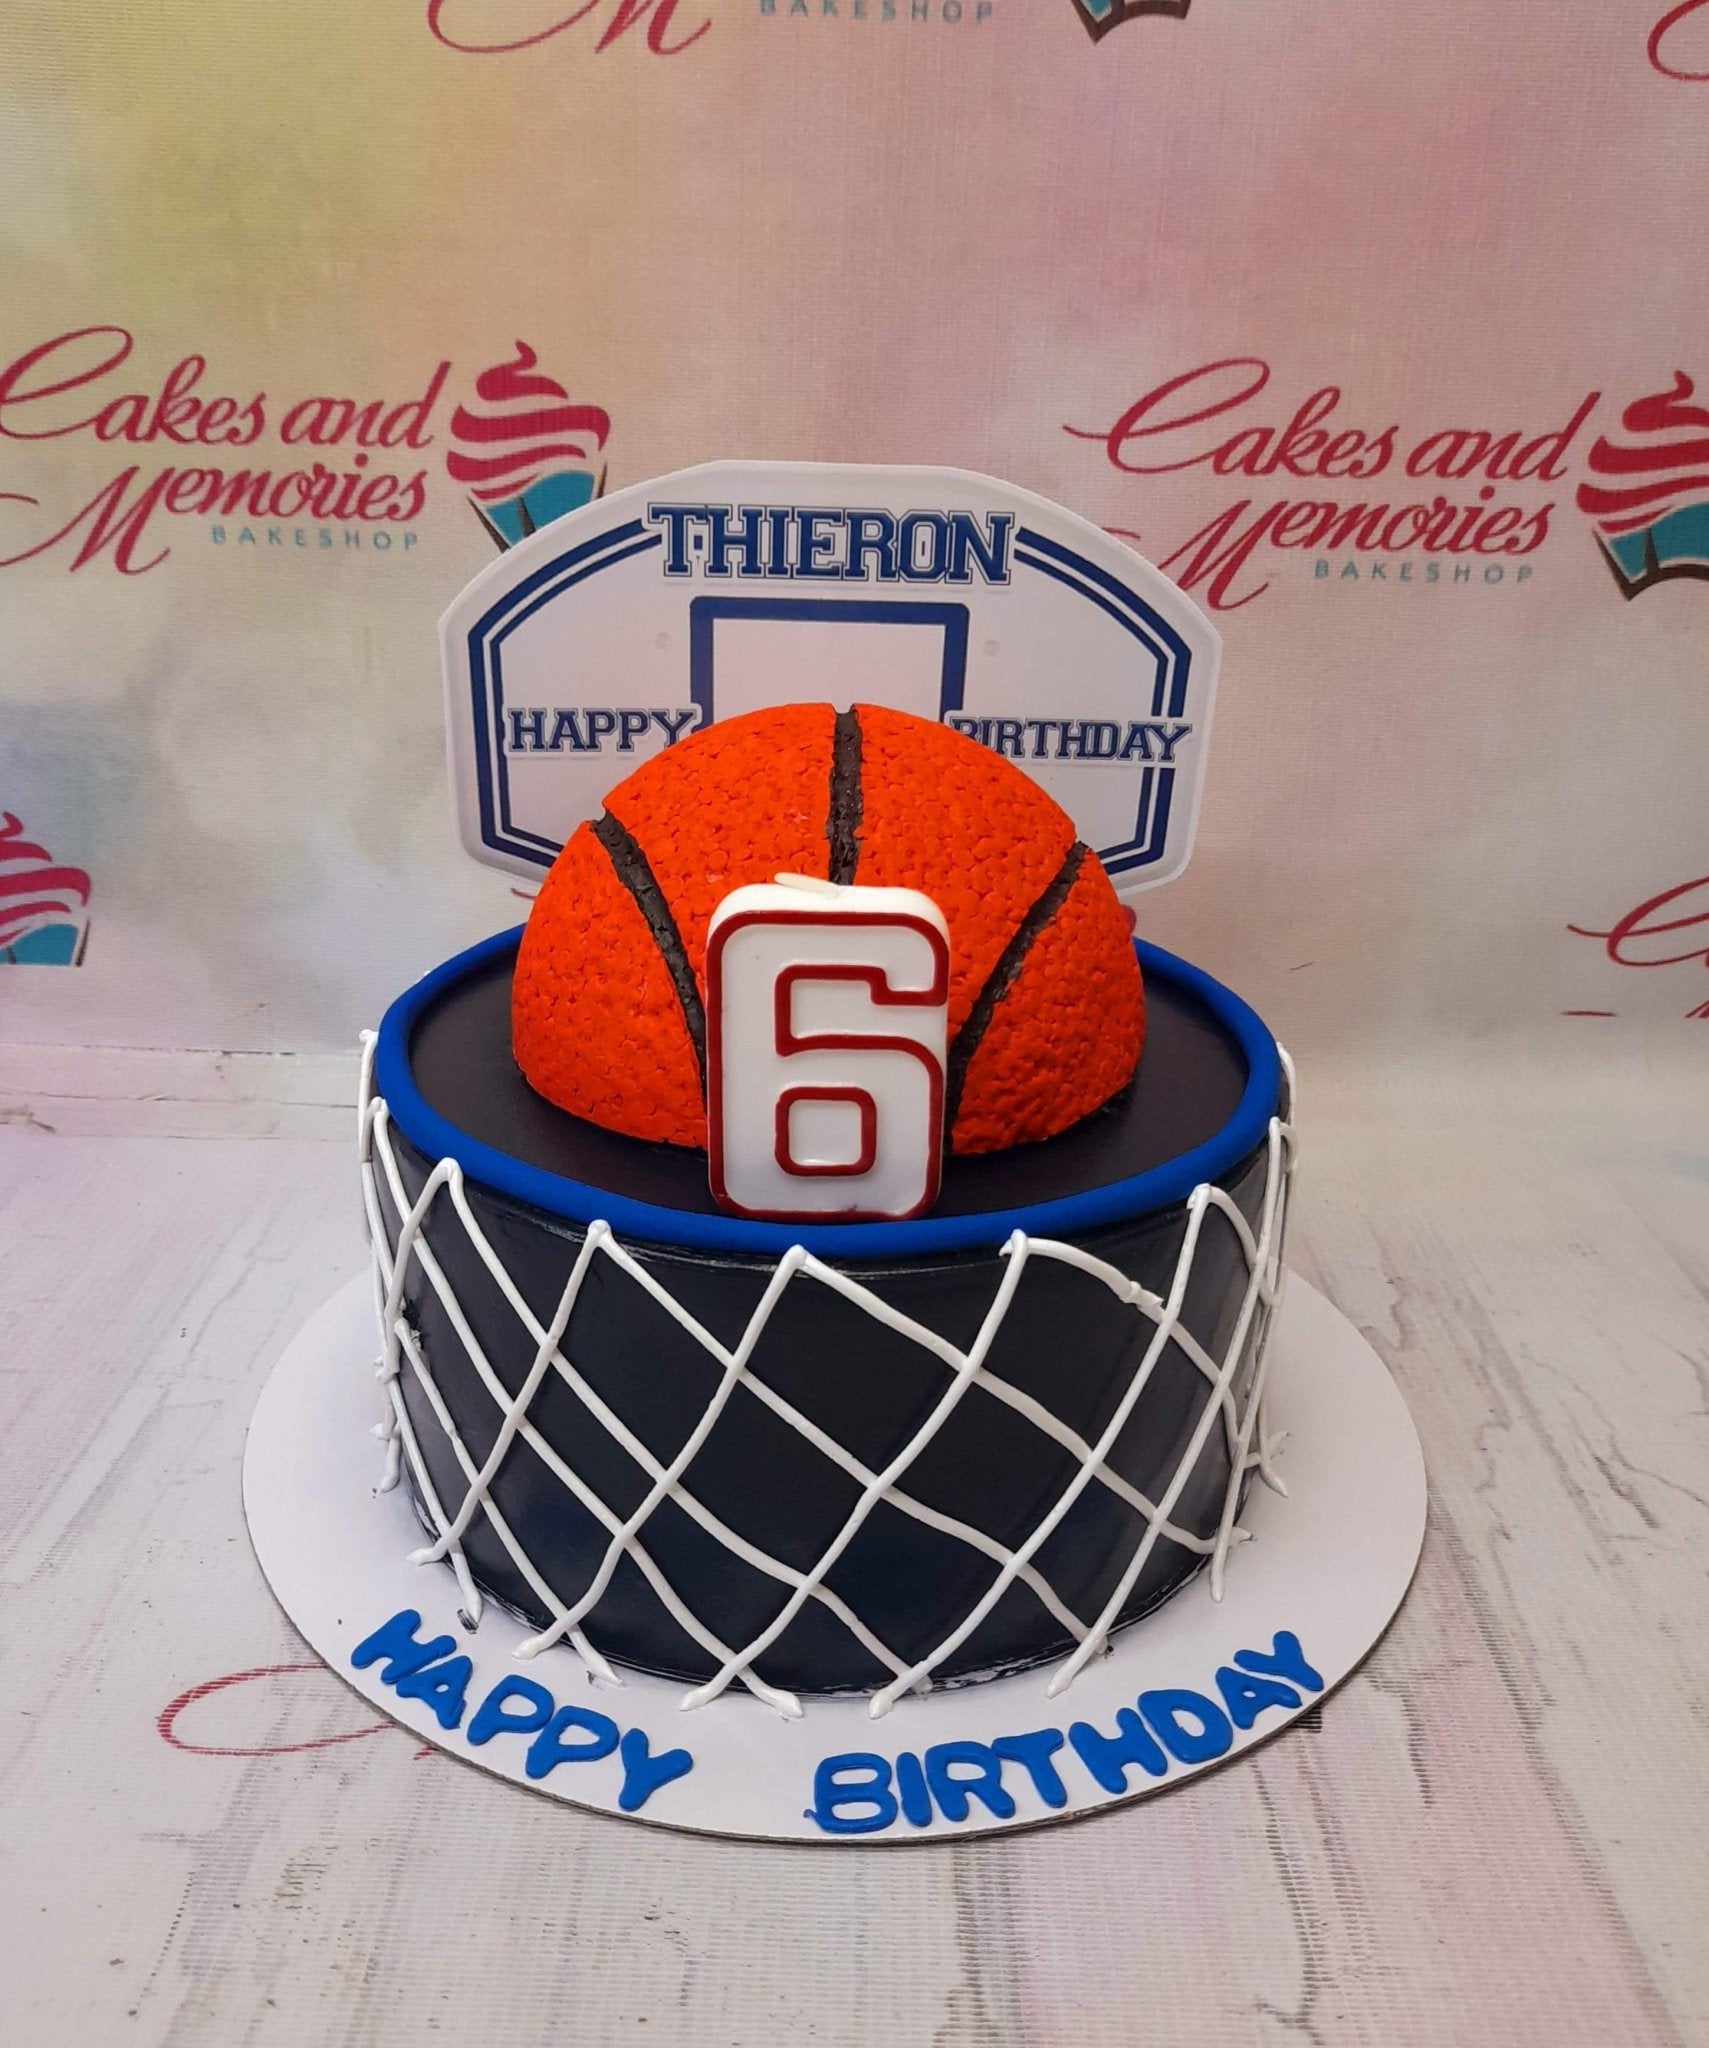 Order your birthday cake Sports, Balloons